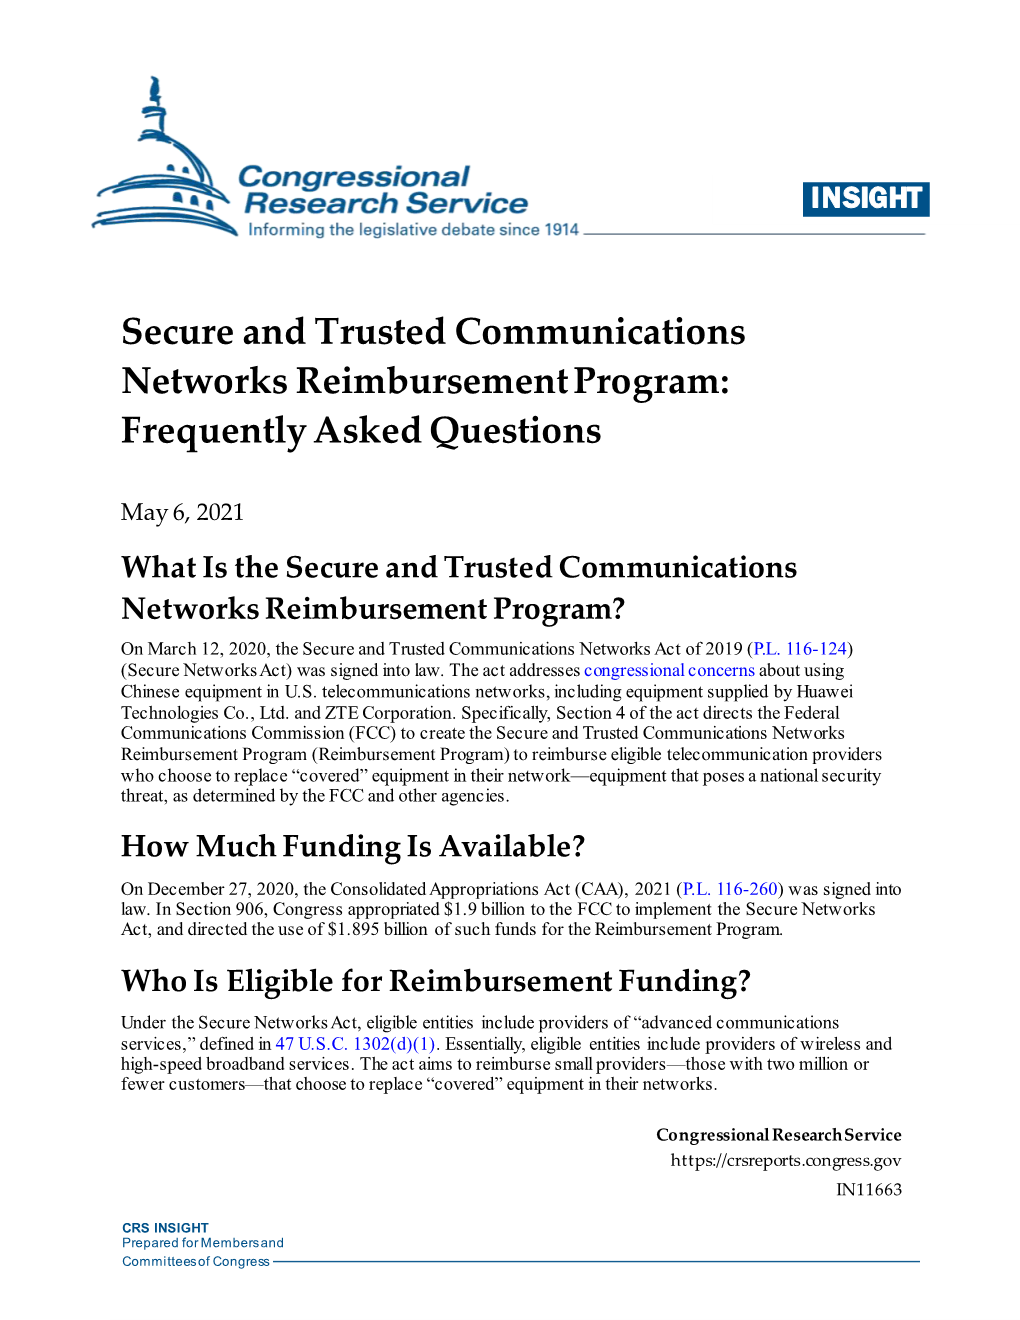 Secure and Trusted Communications Networks Reimbursement Program: Frequently Asked Questions